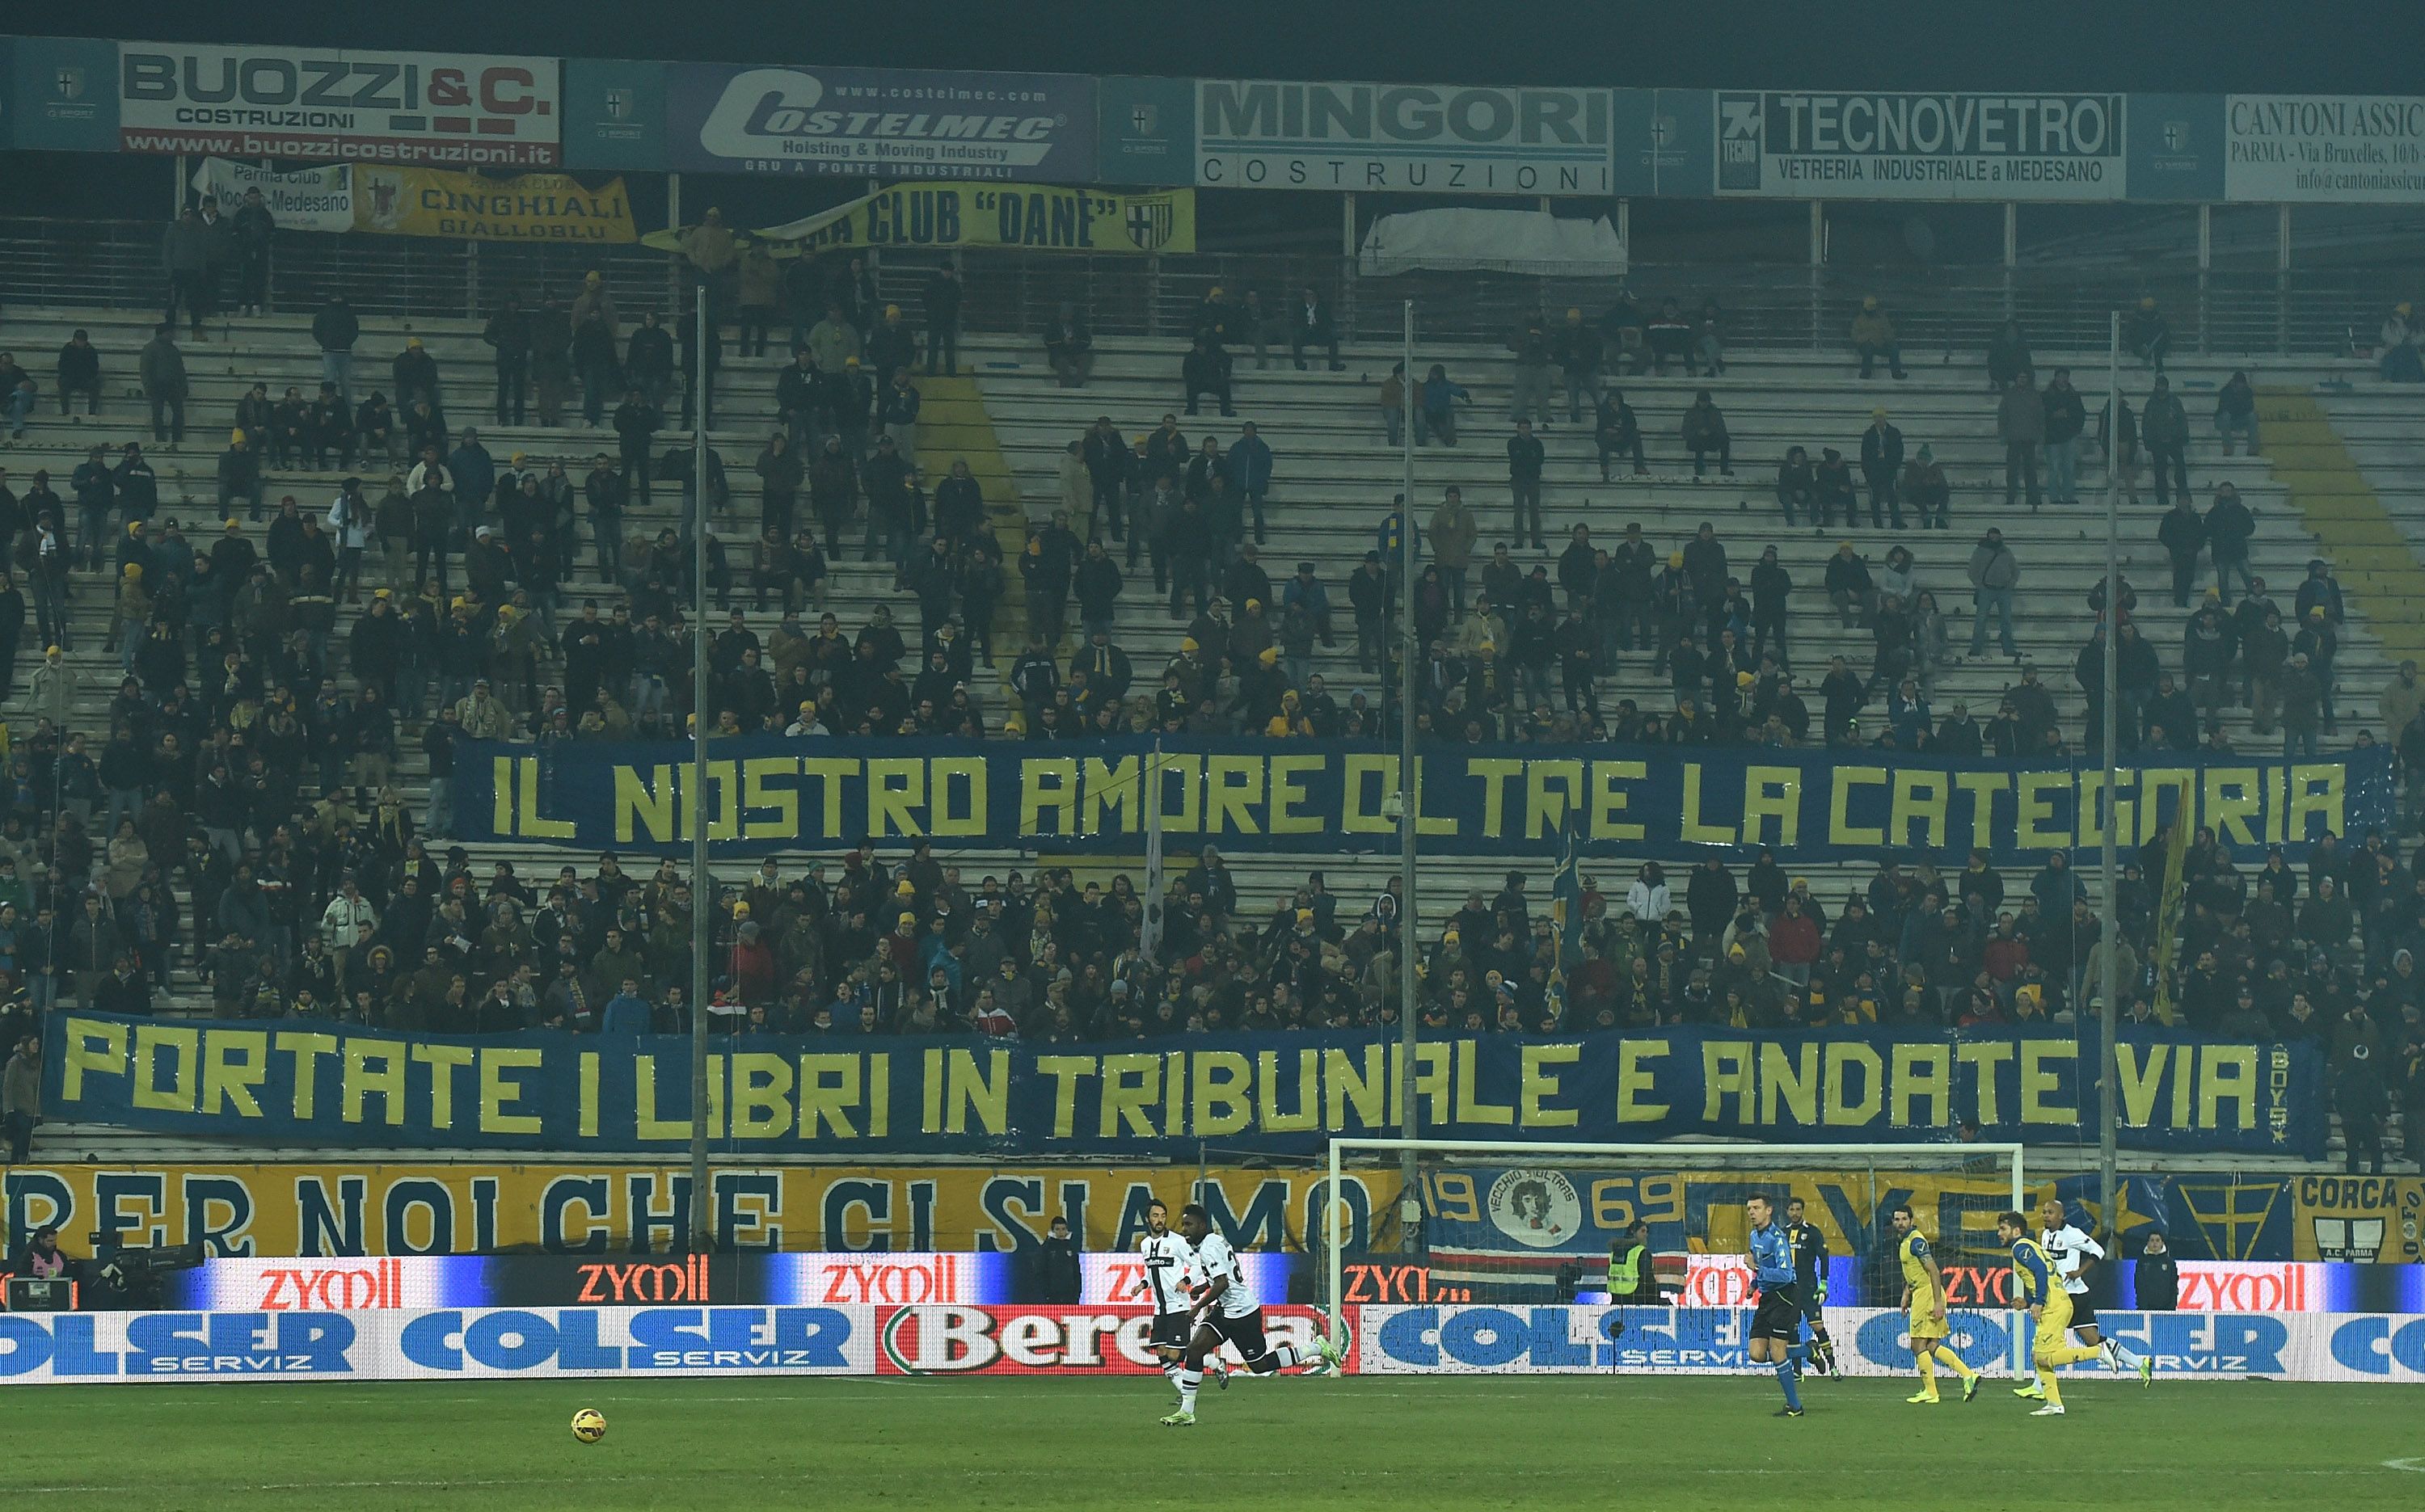 FEATURE  A fan's journey through Parma's revival from bankruptcy